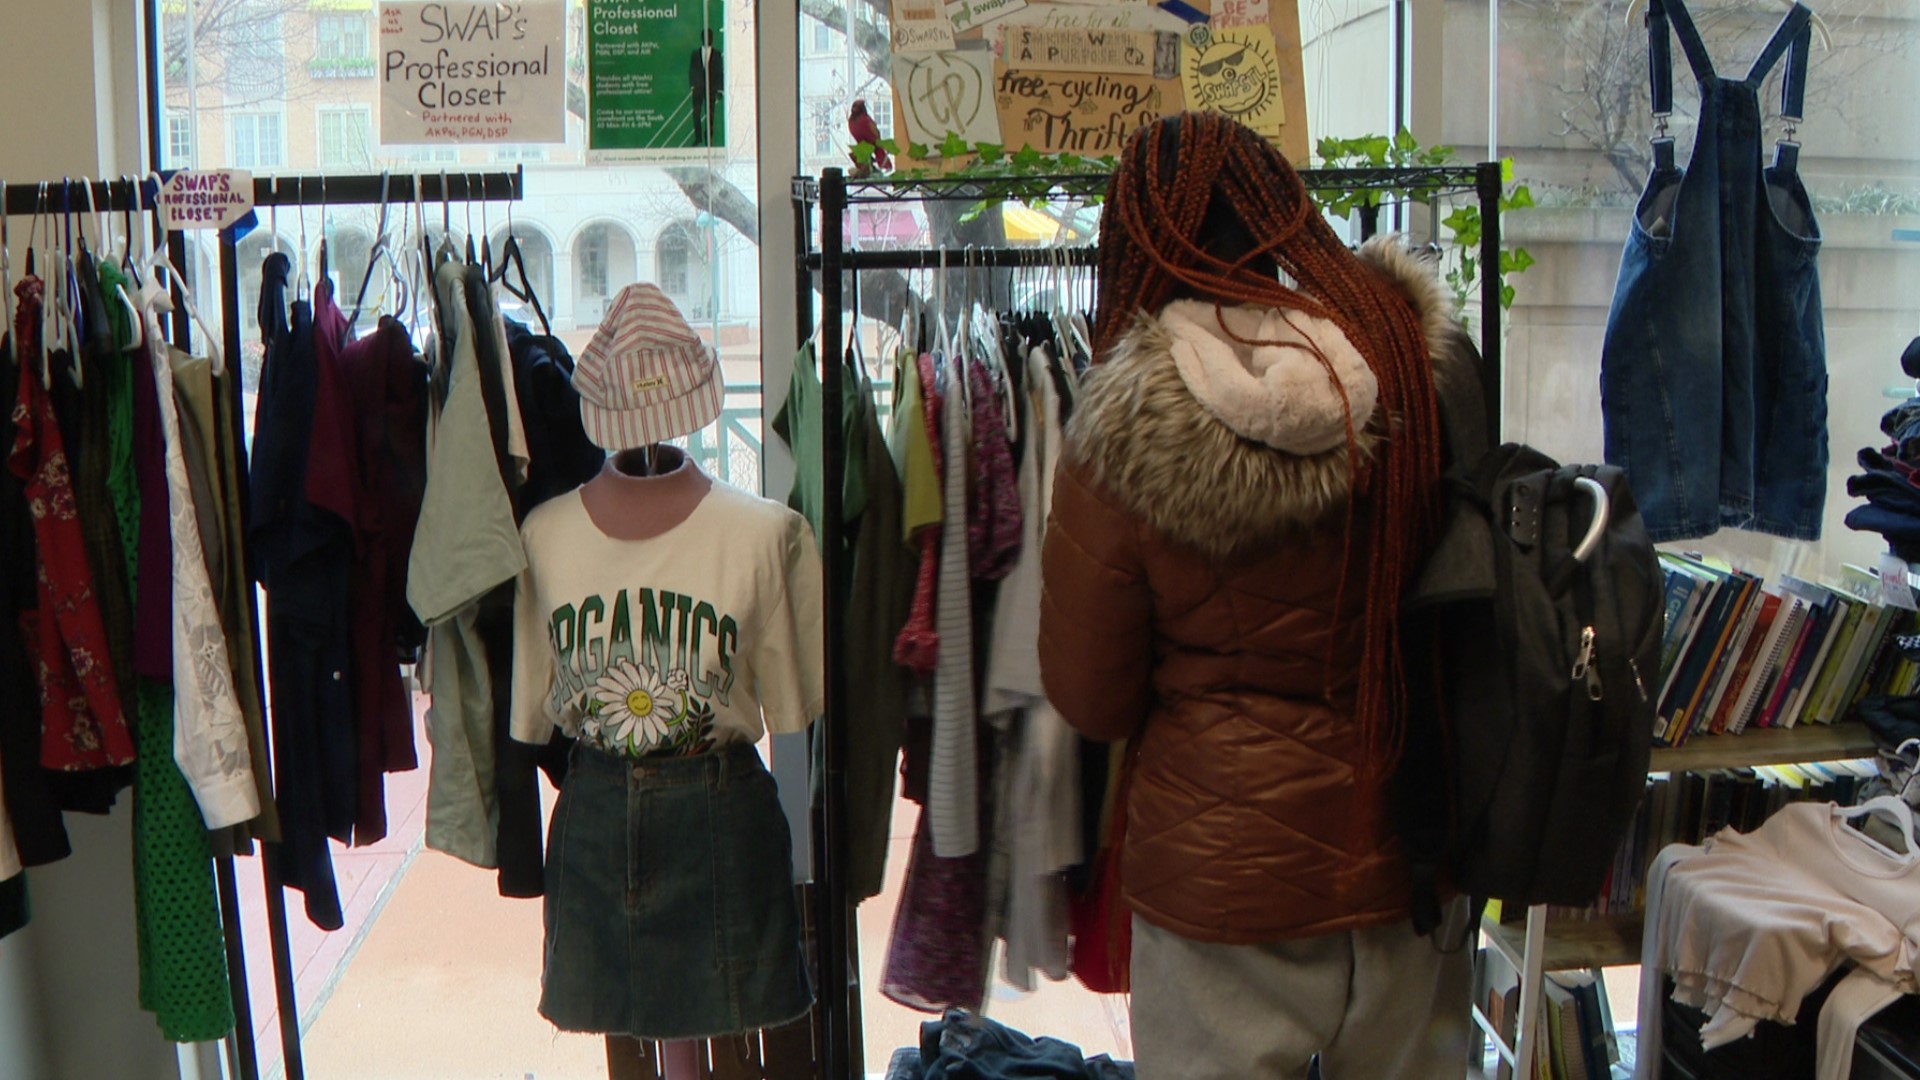 SWAP STL is a store designed to help anyone tied to the Washington University community.